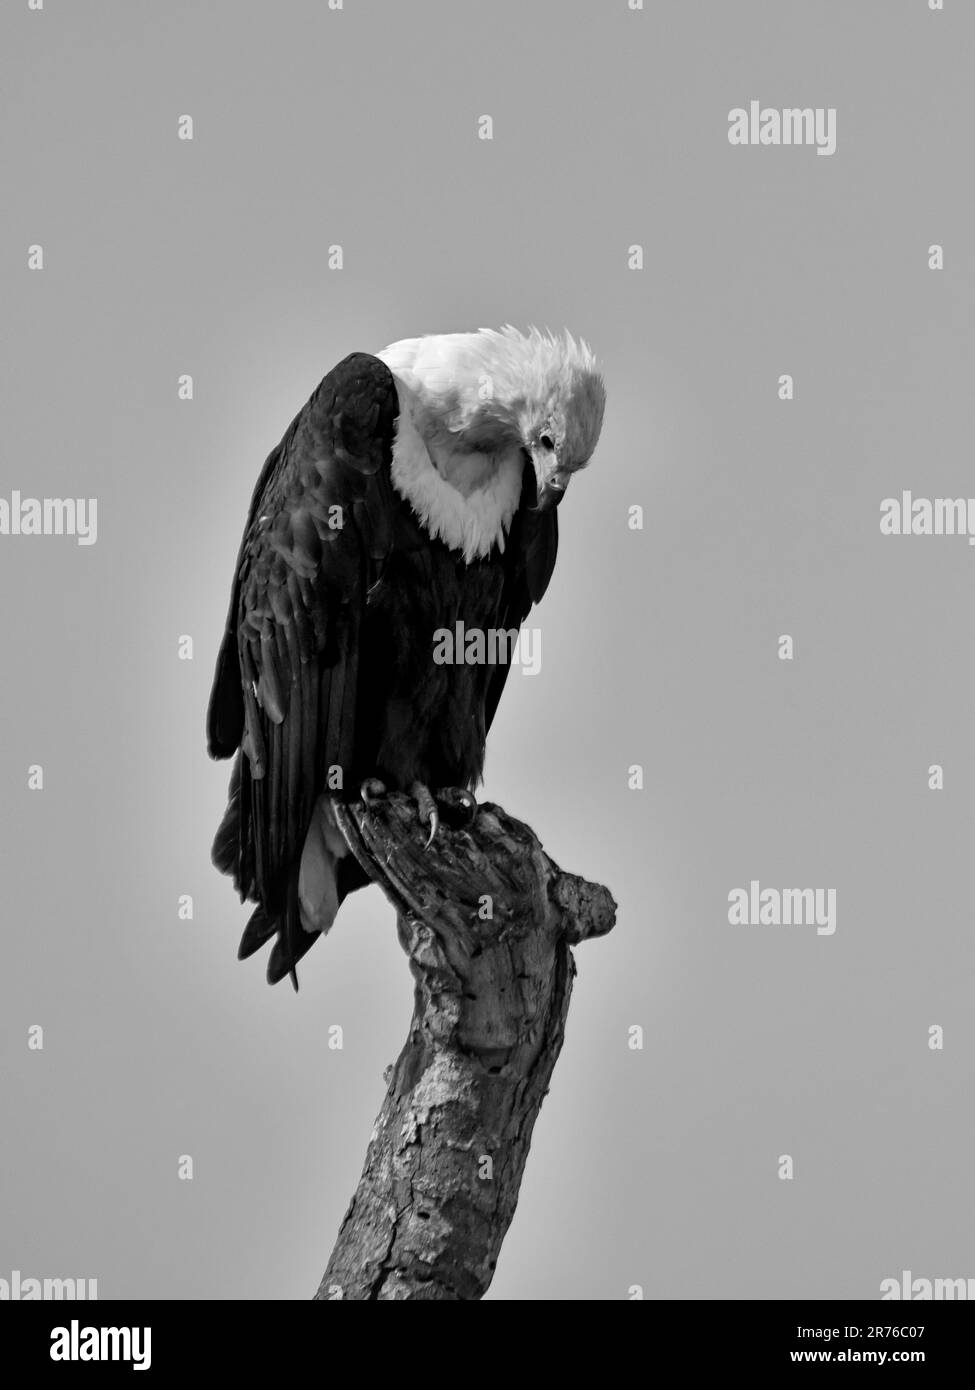 A Fish Eagle perched on a dead tree stump in Southern African savannah Stock Photo